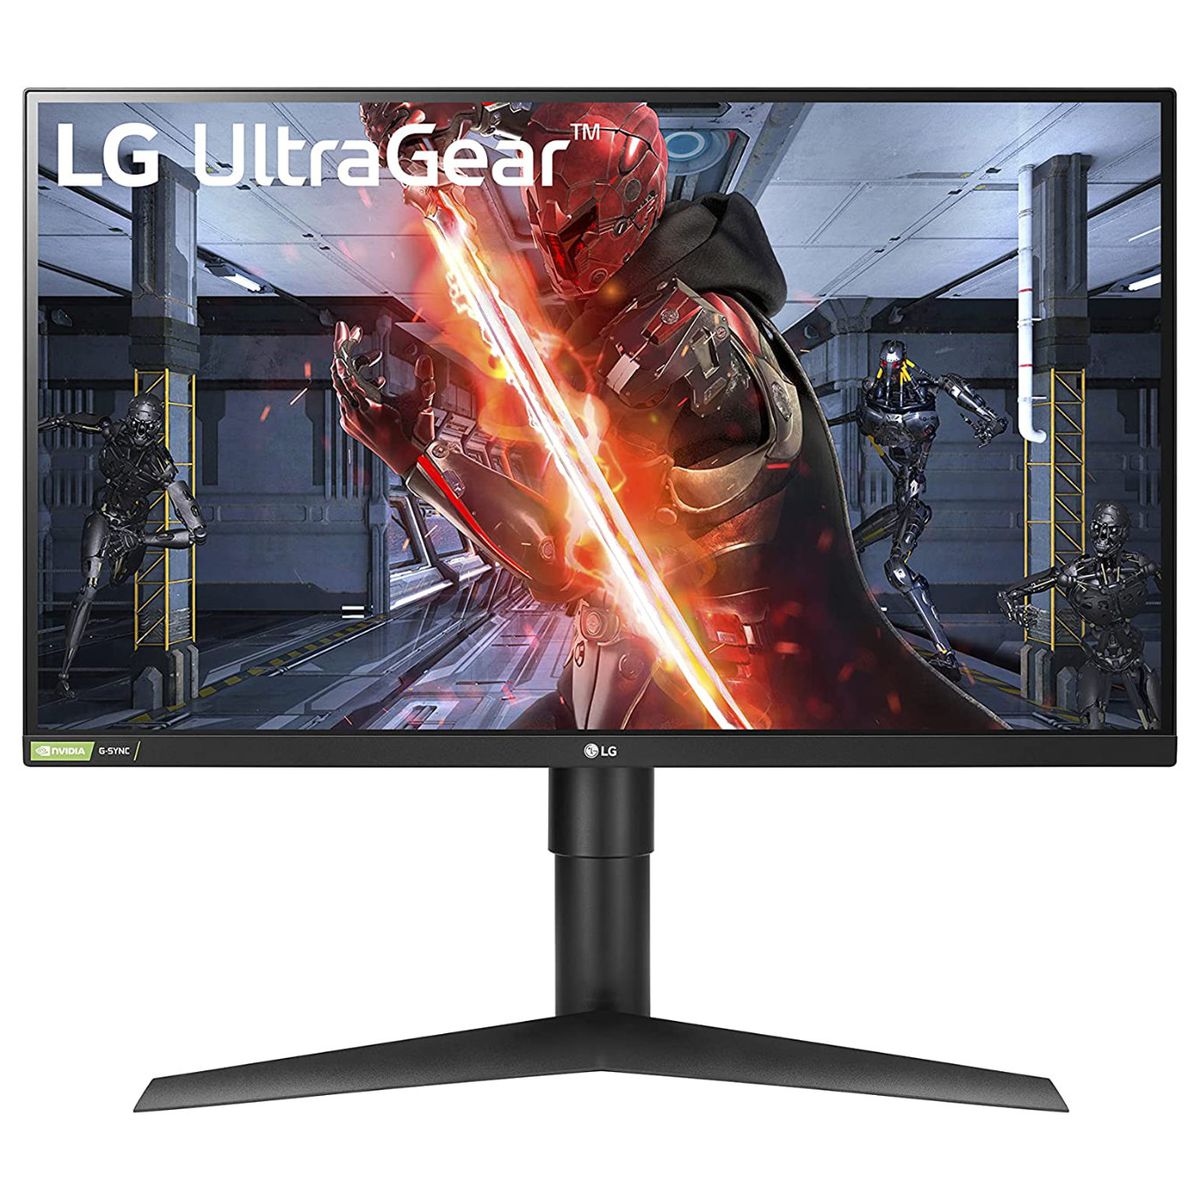 LG’s 1440p gaming monitor is cheaper now than it was on Prime Day